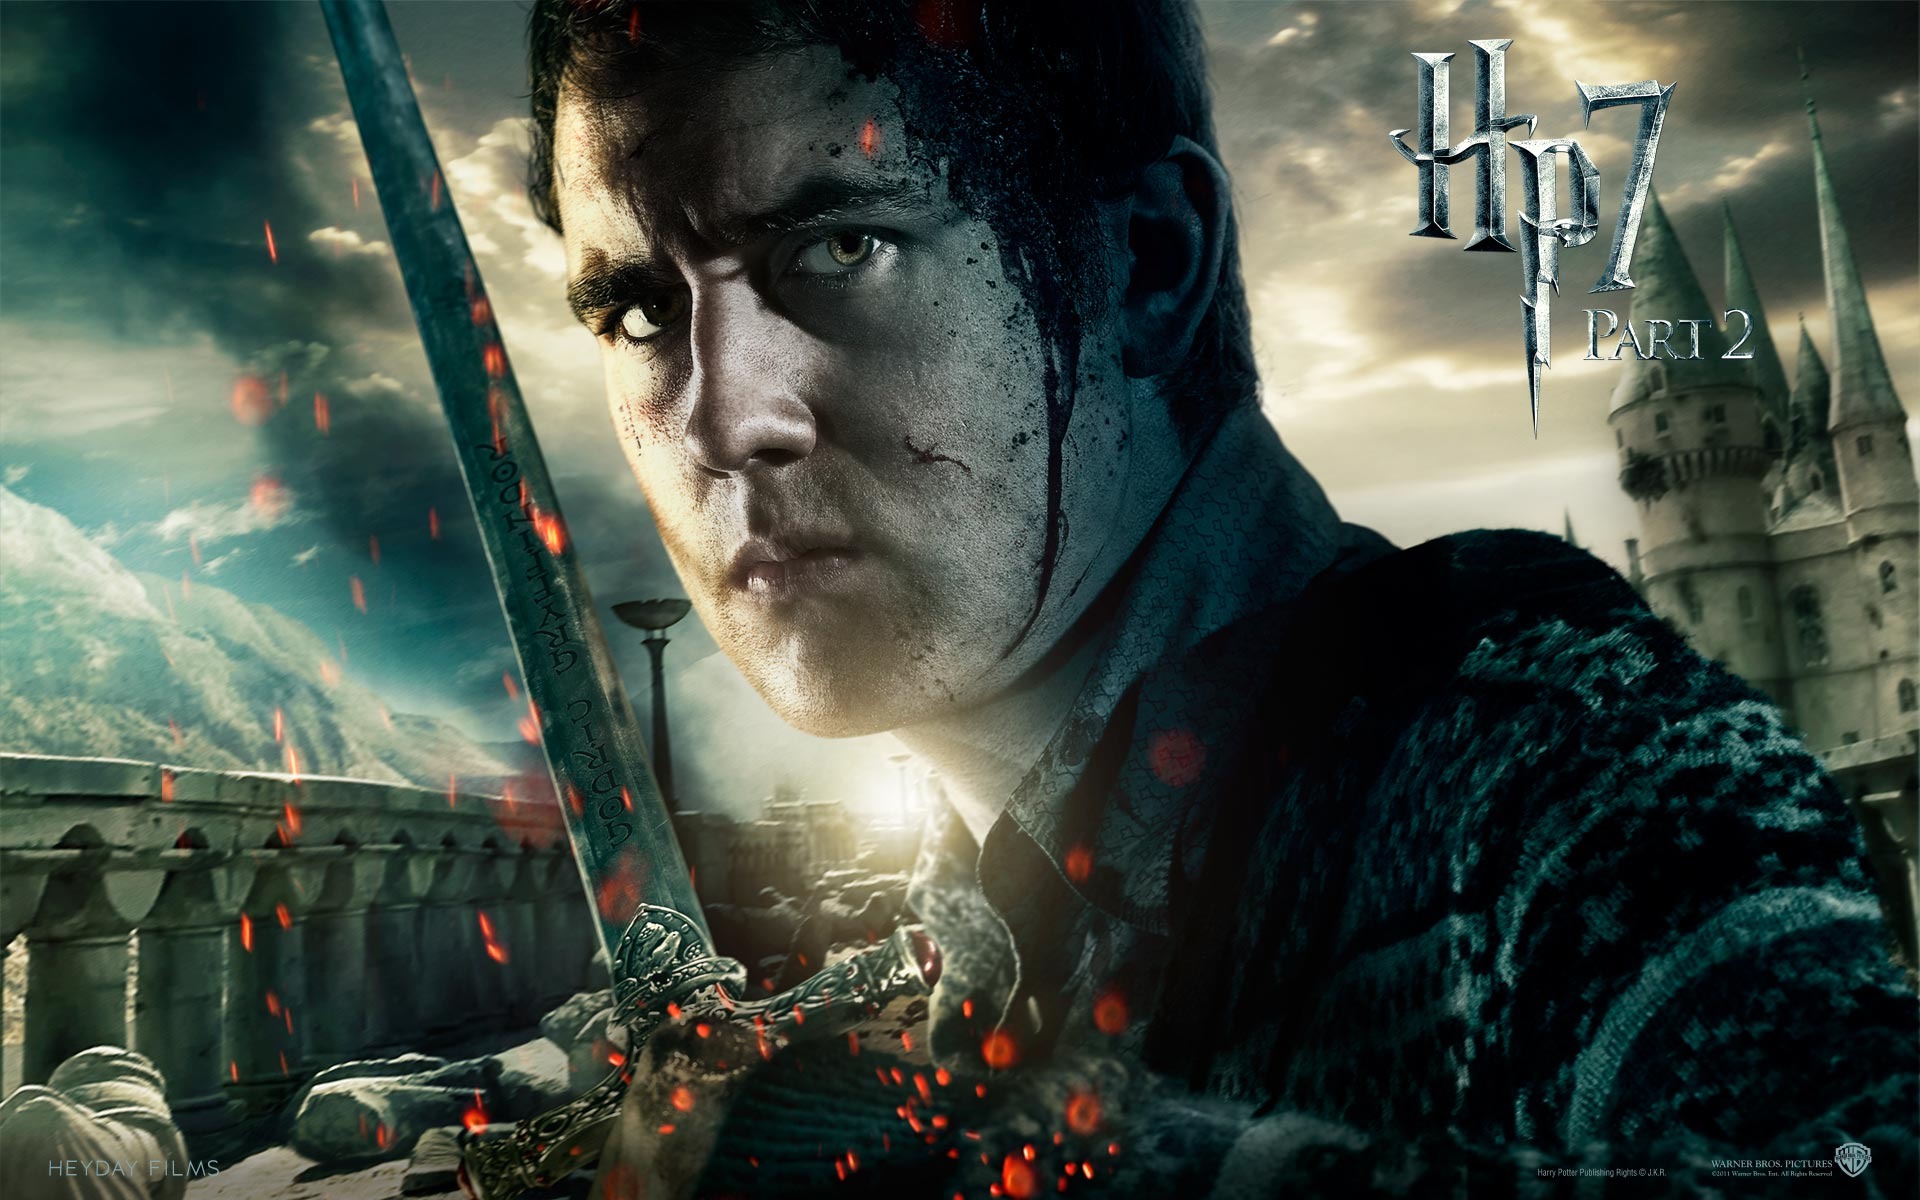 2011 Harry Potter and the Deathly Hallows HD wallpapers #13 - 1920x1200